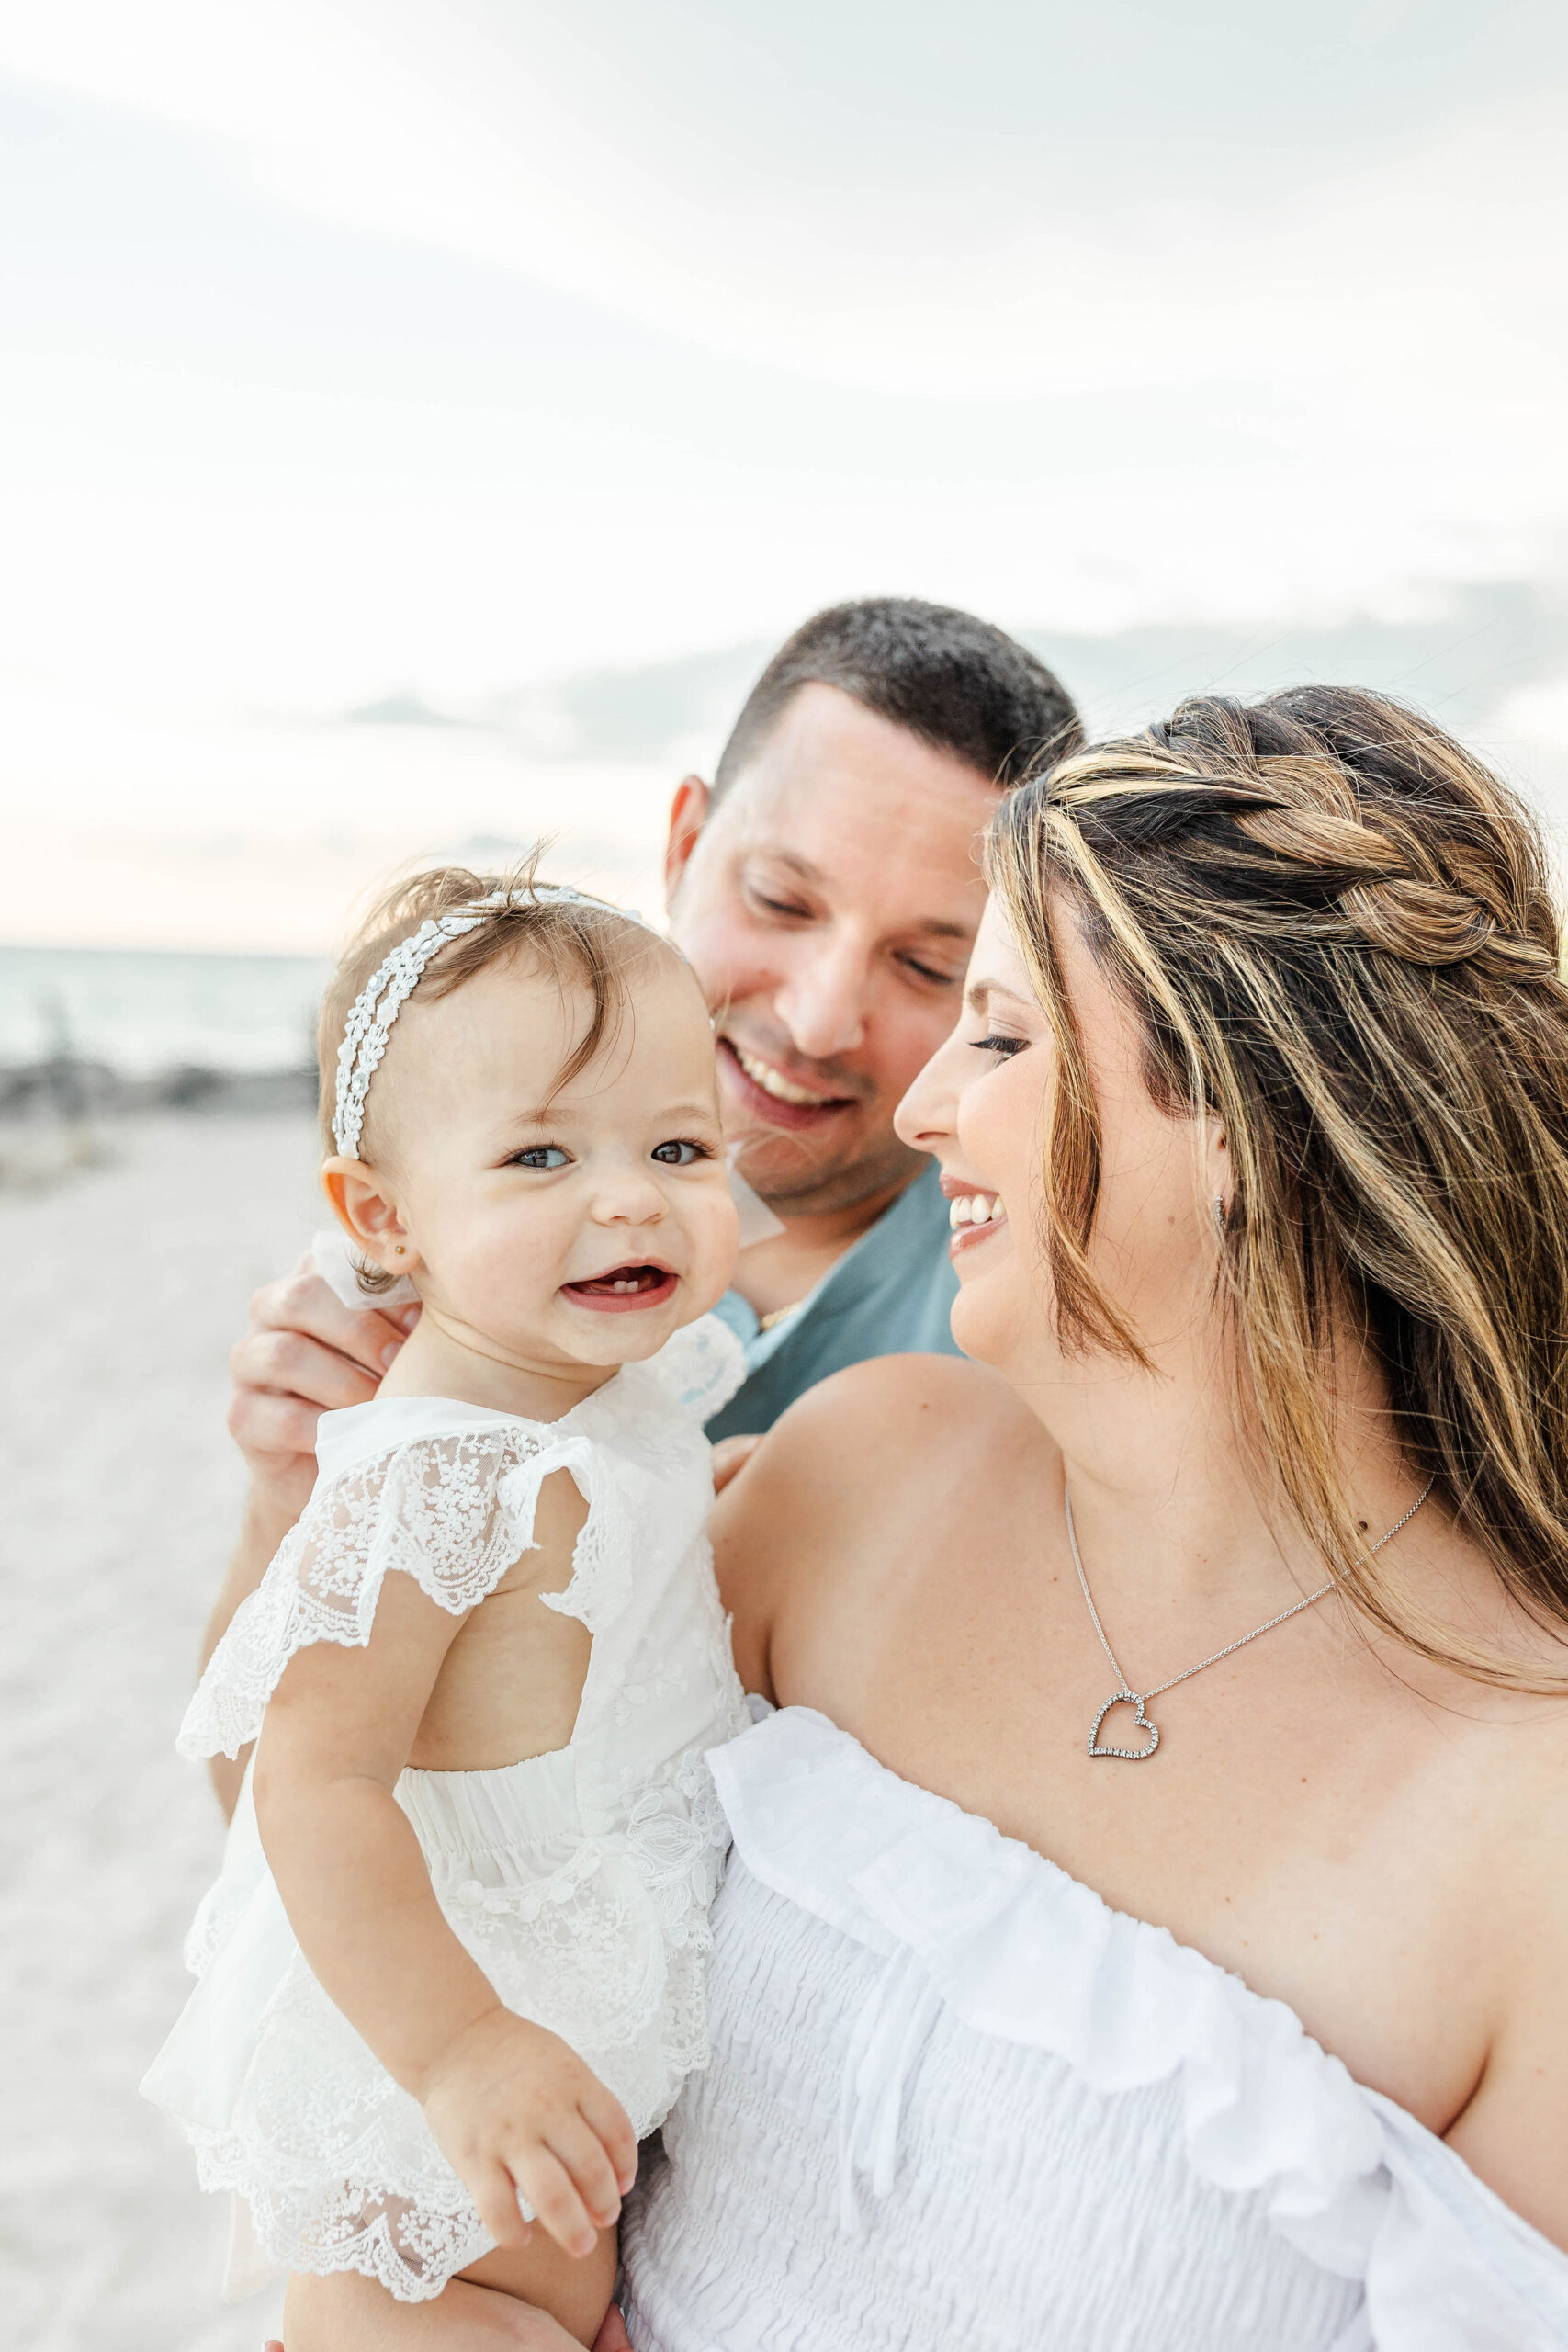 A mother and father walk down a beach laughing with their toddler daughter in mom's arms during things to do in miami with toddlers